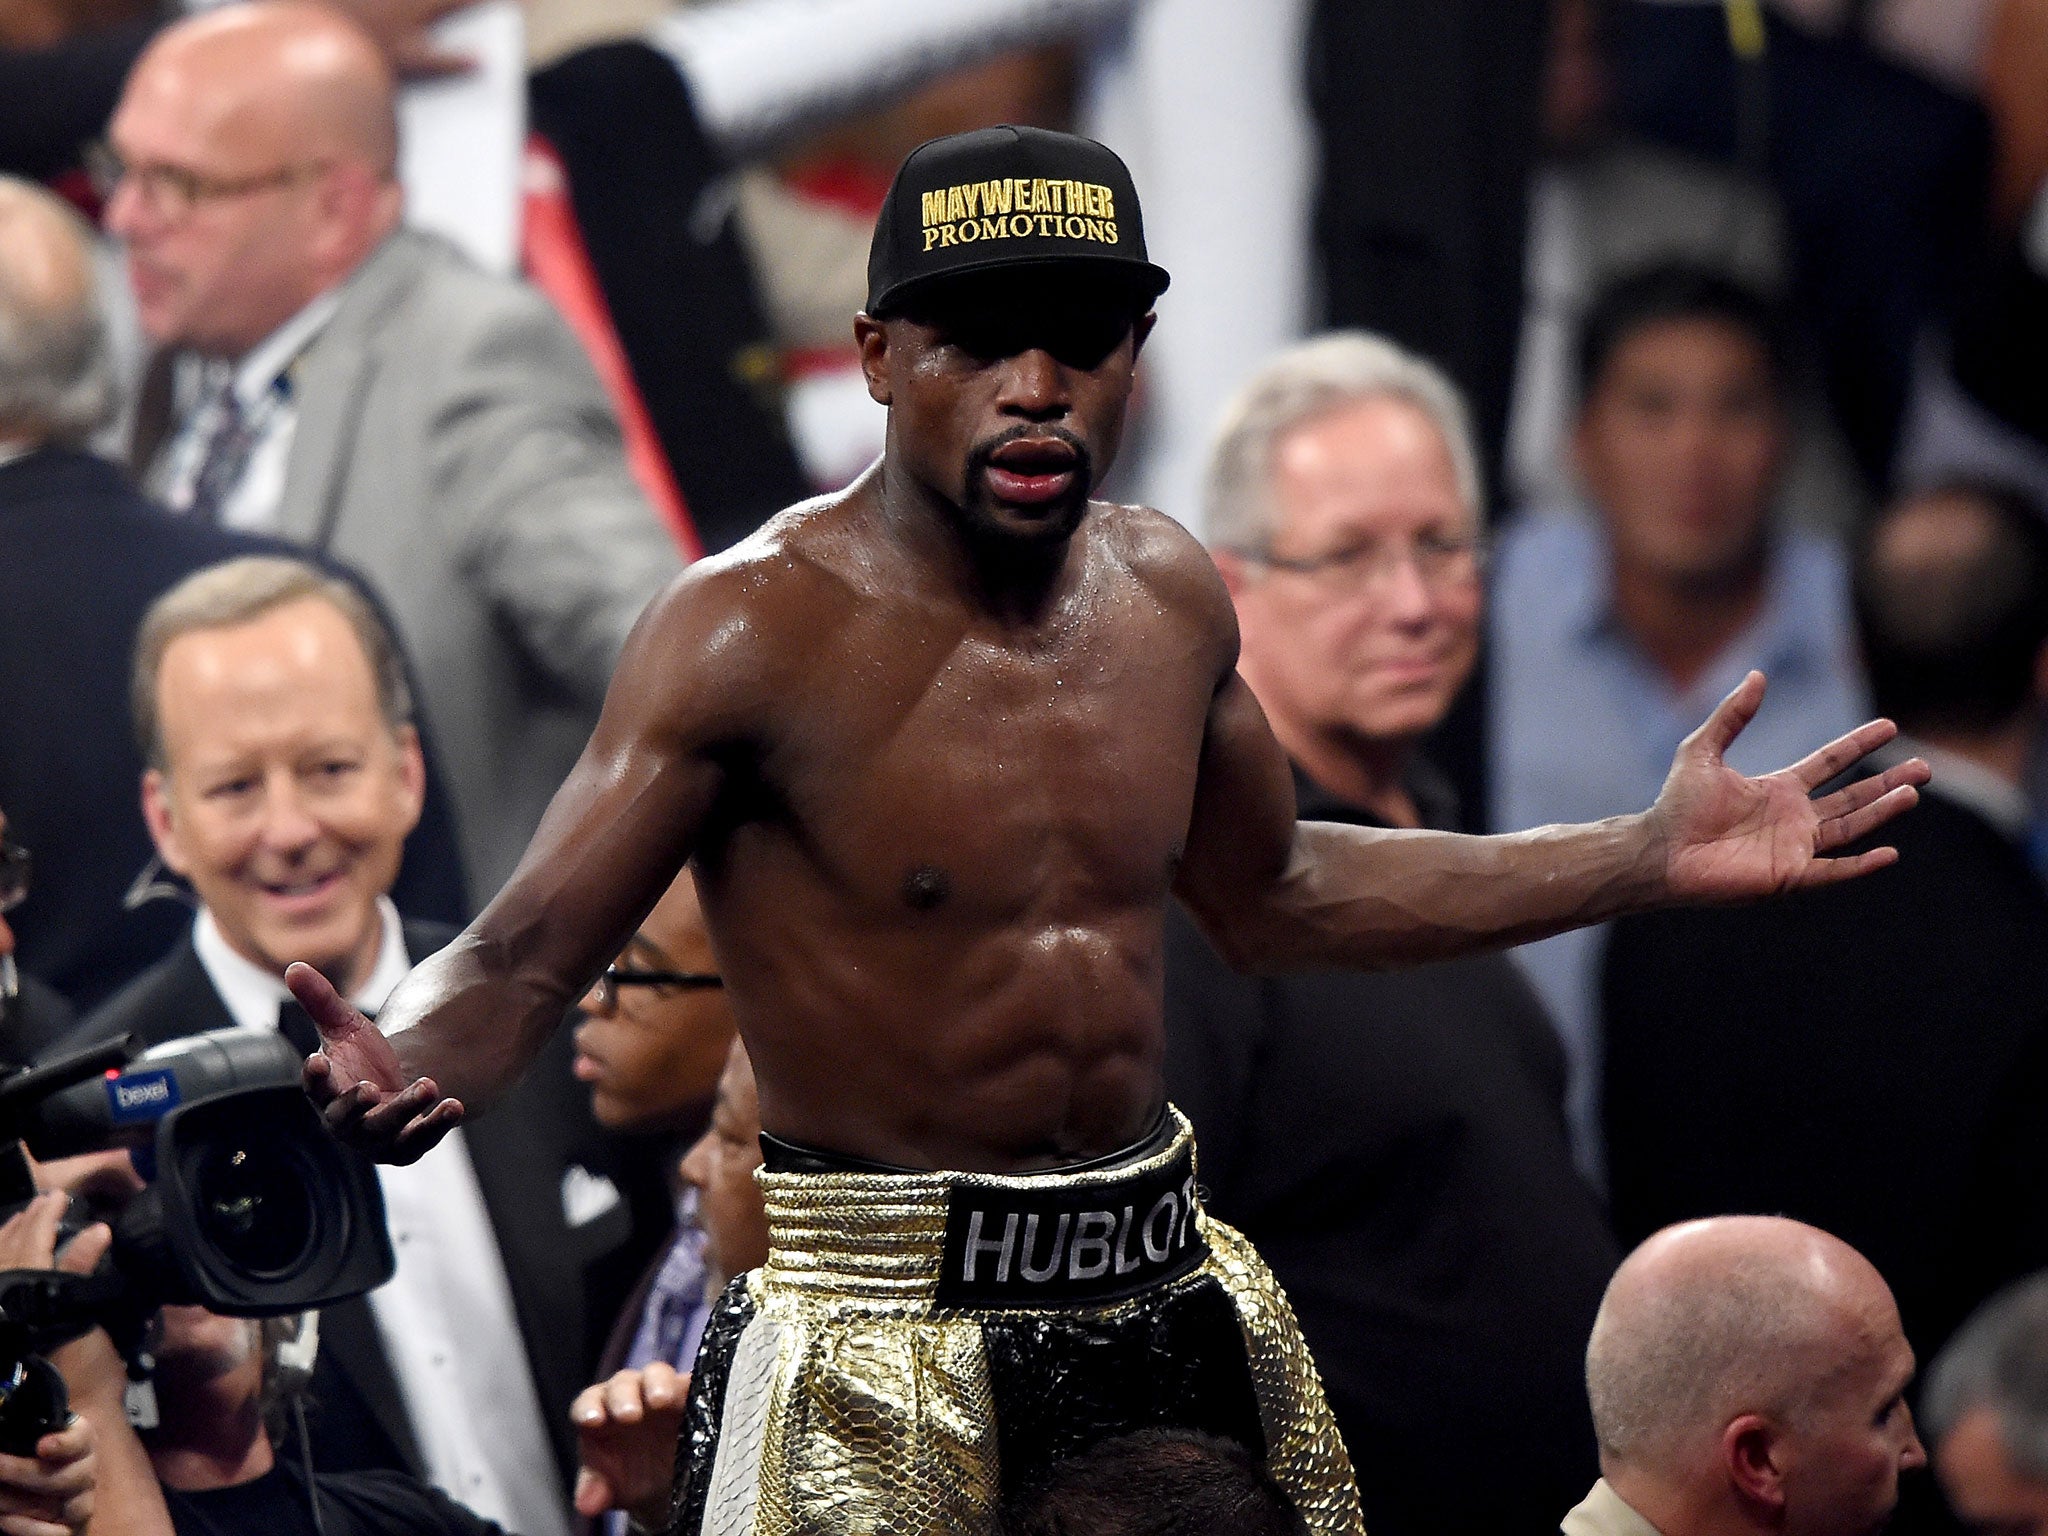 Floyd Mayweather celebrates his win over Manny Pacquiao